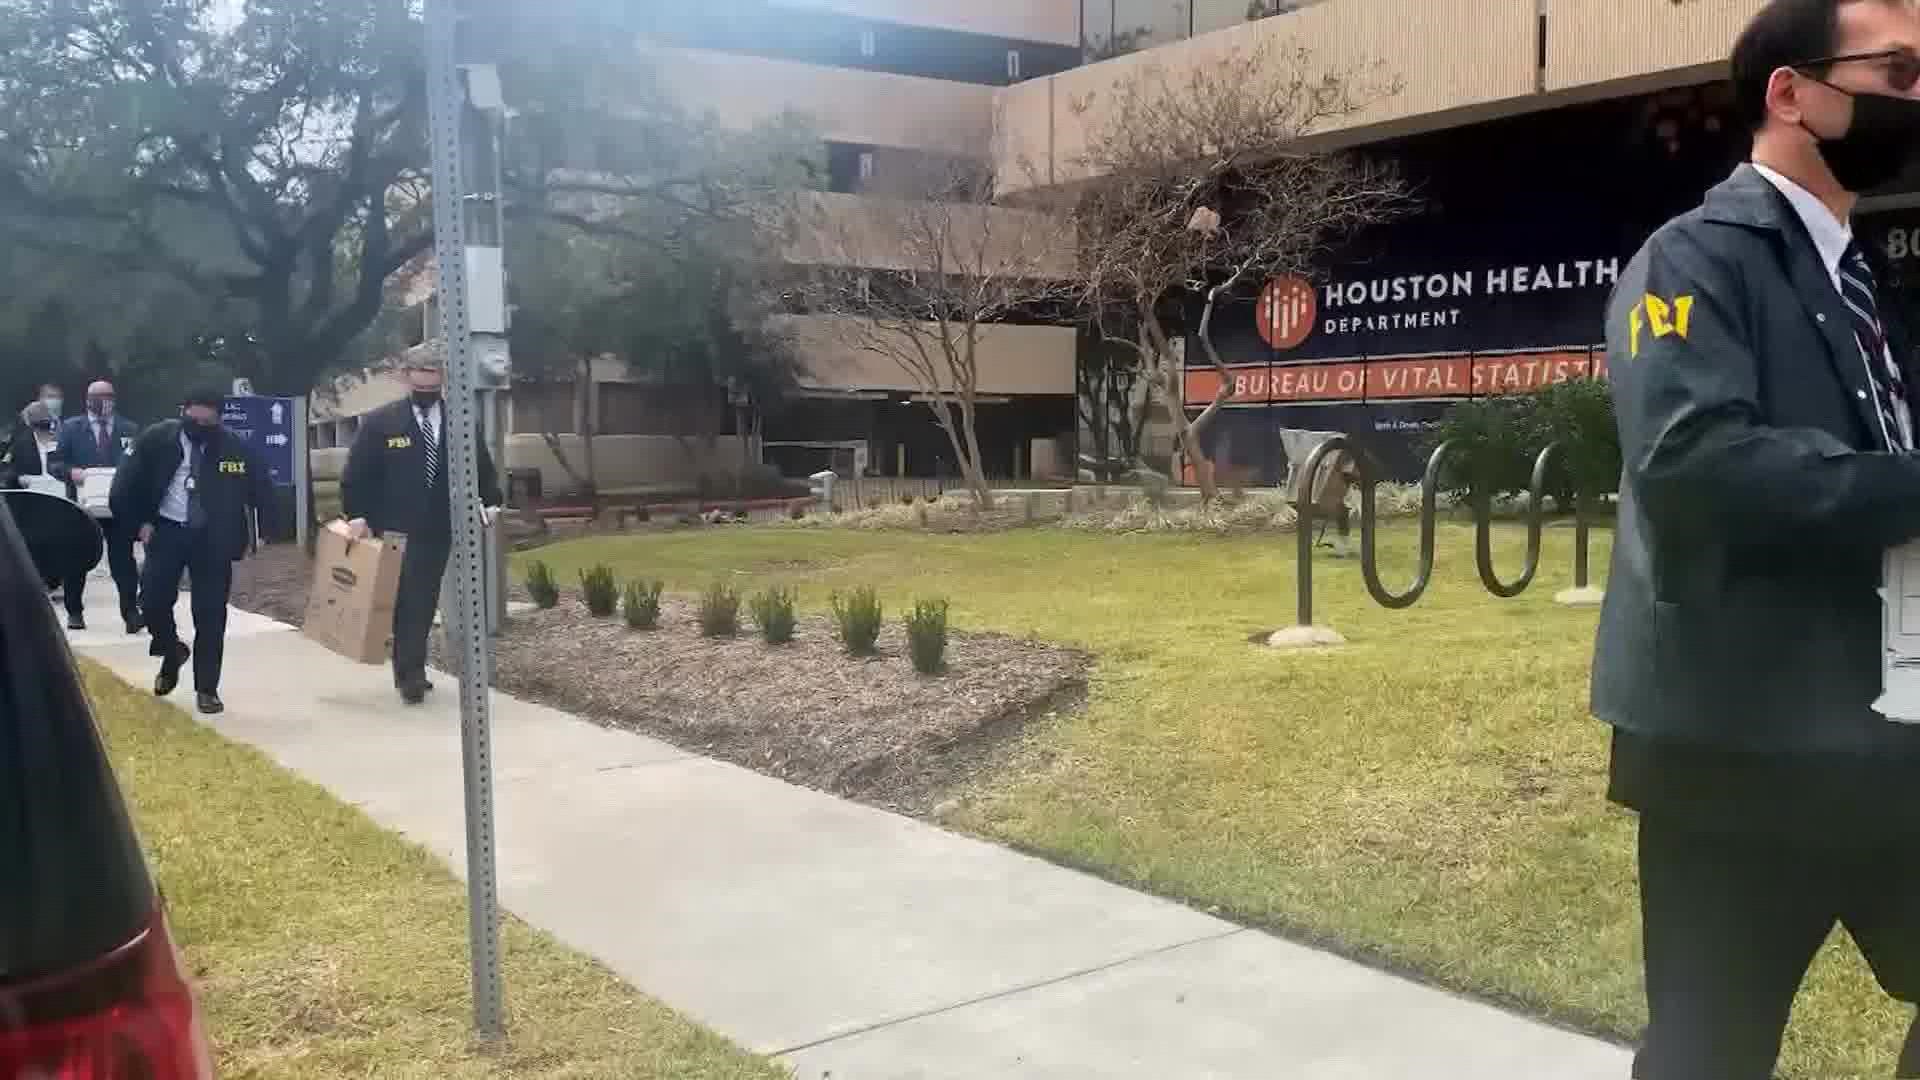 A City of Houston spokesperson said FBI agents served a search warrant in a case involving a health department employee and a marketing vendor.